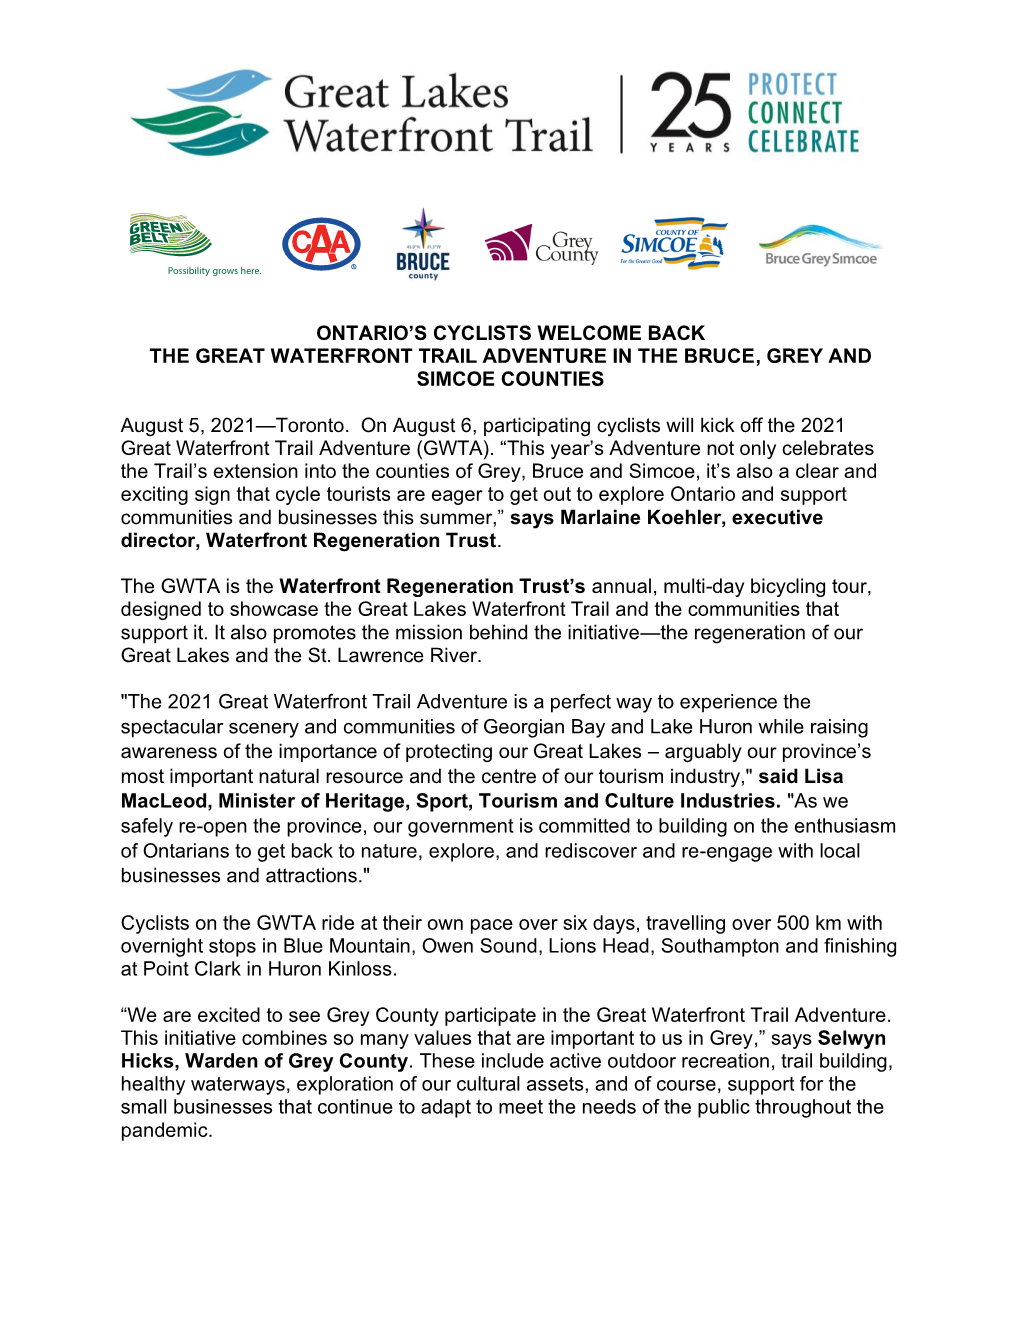 ONTARIO's CYCLISTS WELCOME BACK the GREAT WATERFRONT TRAIL ADVENTURE in the BRUCE, GREY and SIMCOE COUNTIES August 5, 2021—